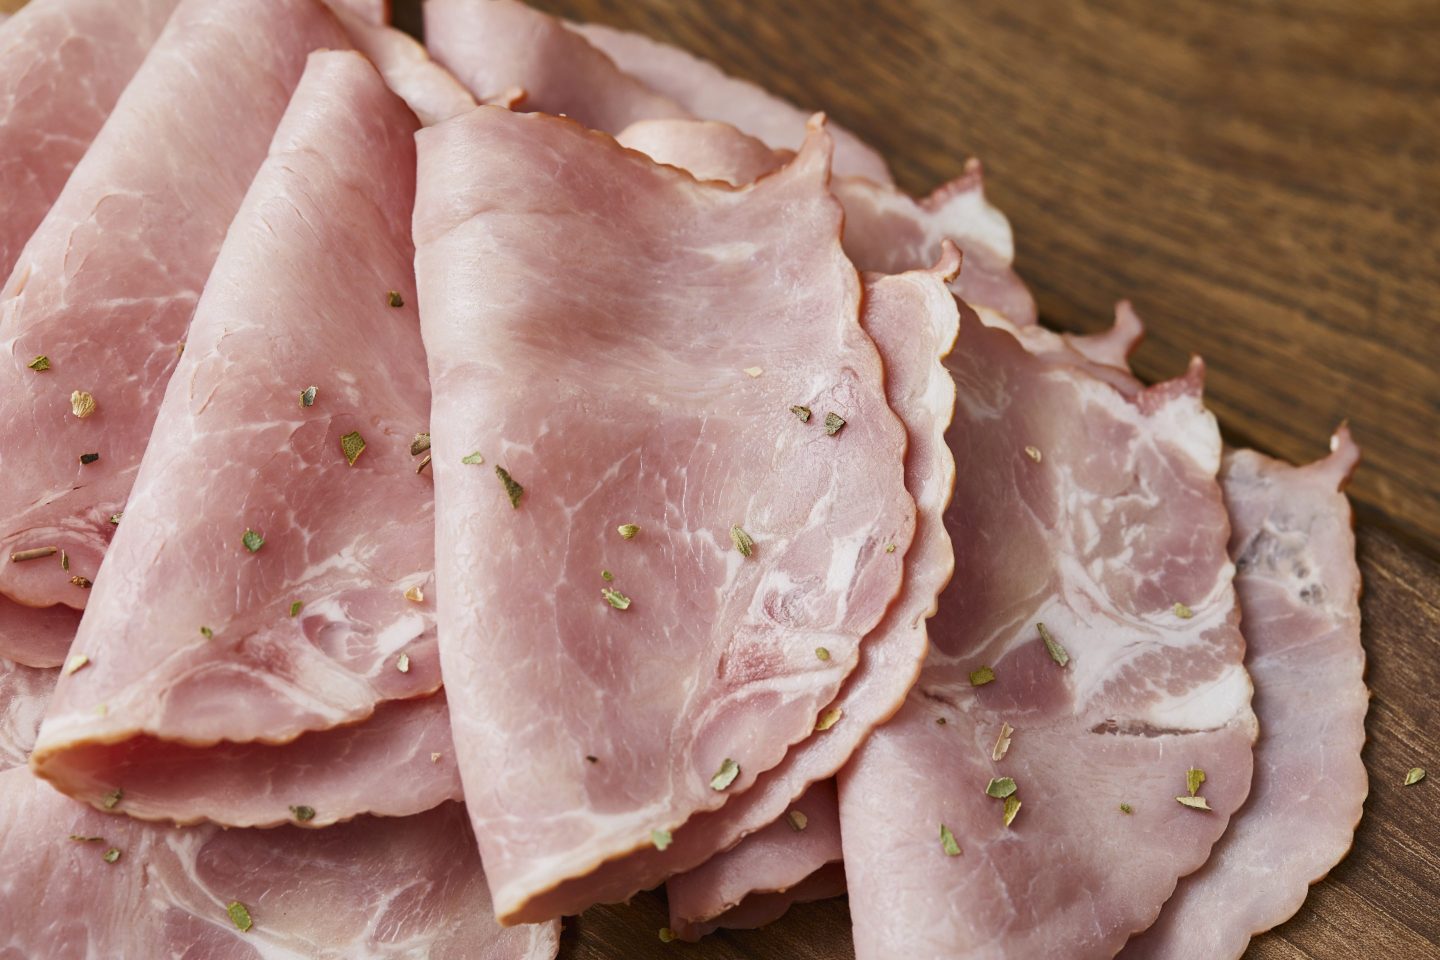 A listeria outbreak linked to deli meat has killed 2 people and sickened dozens more. What to know about symptoms and how to stay safe